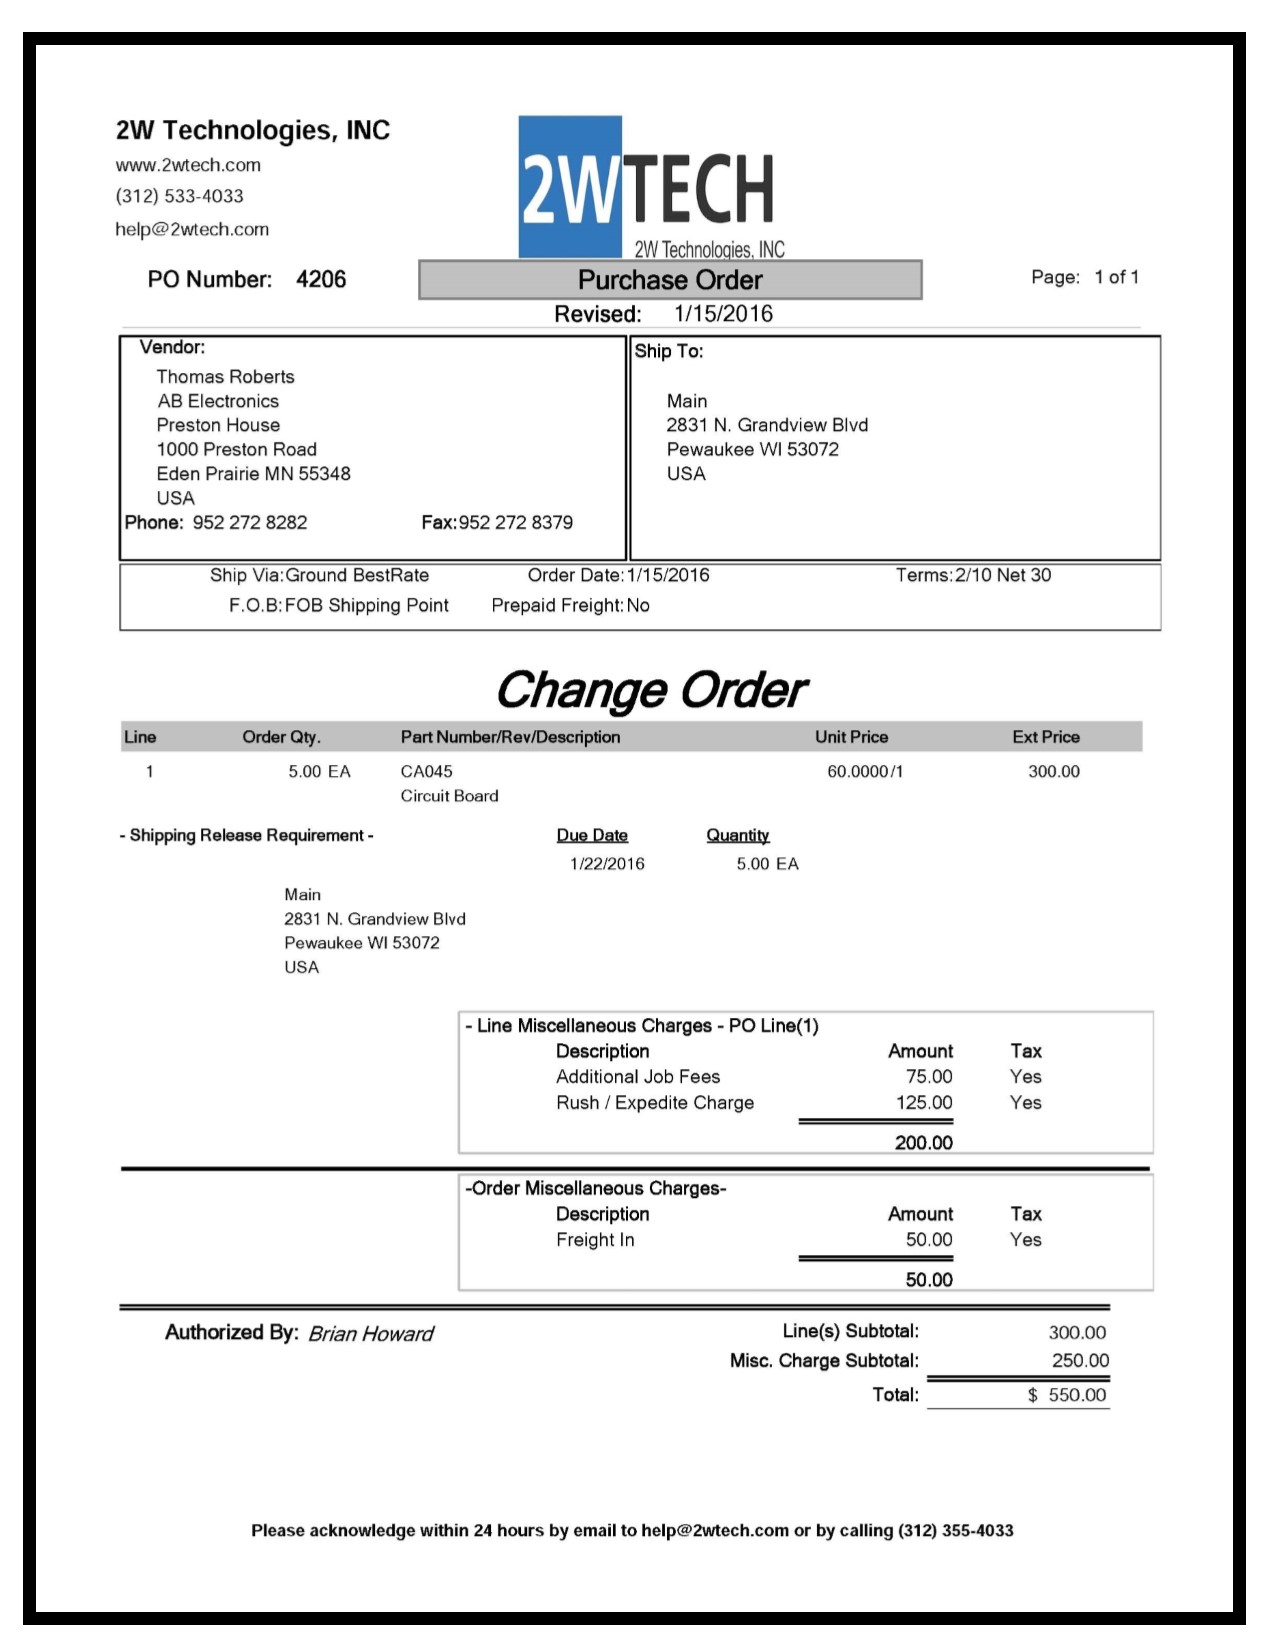 Purchase Orders-image